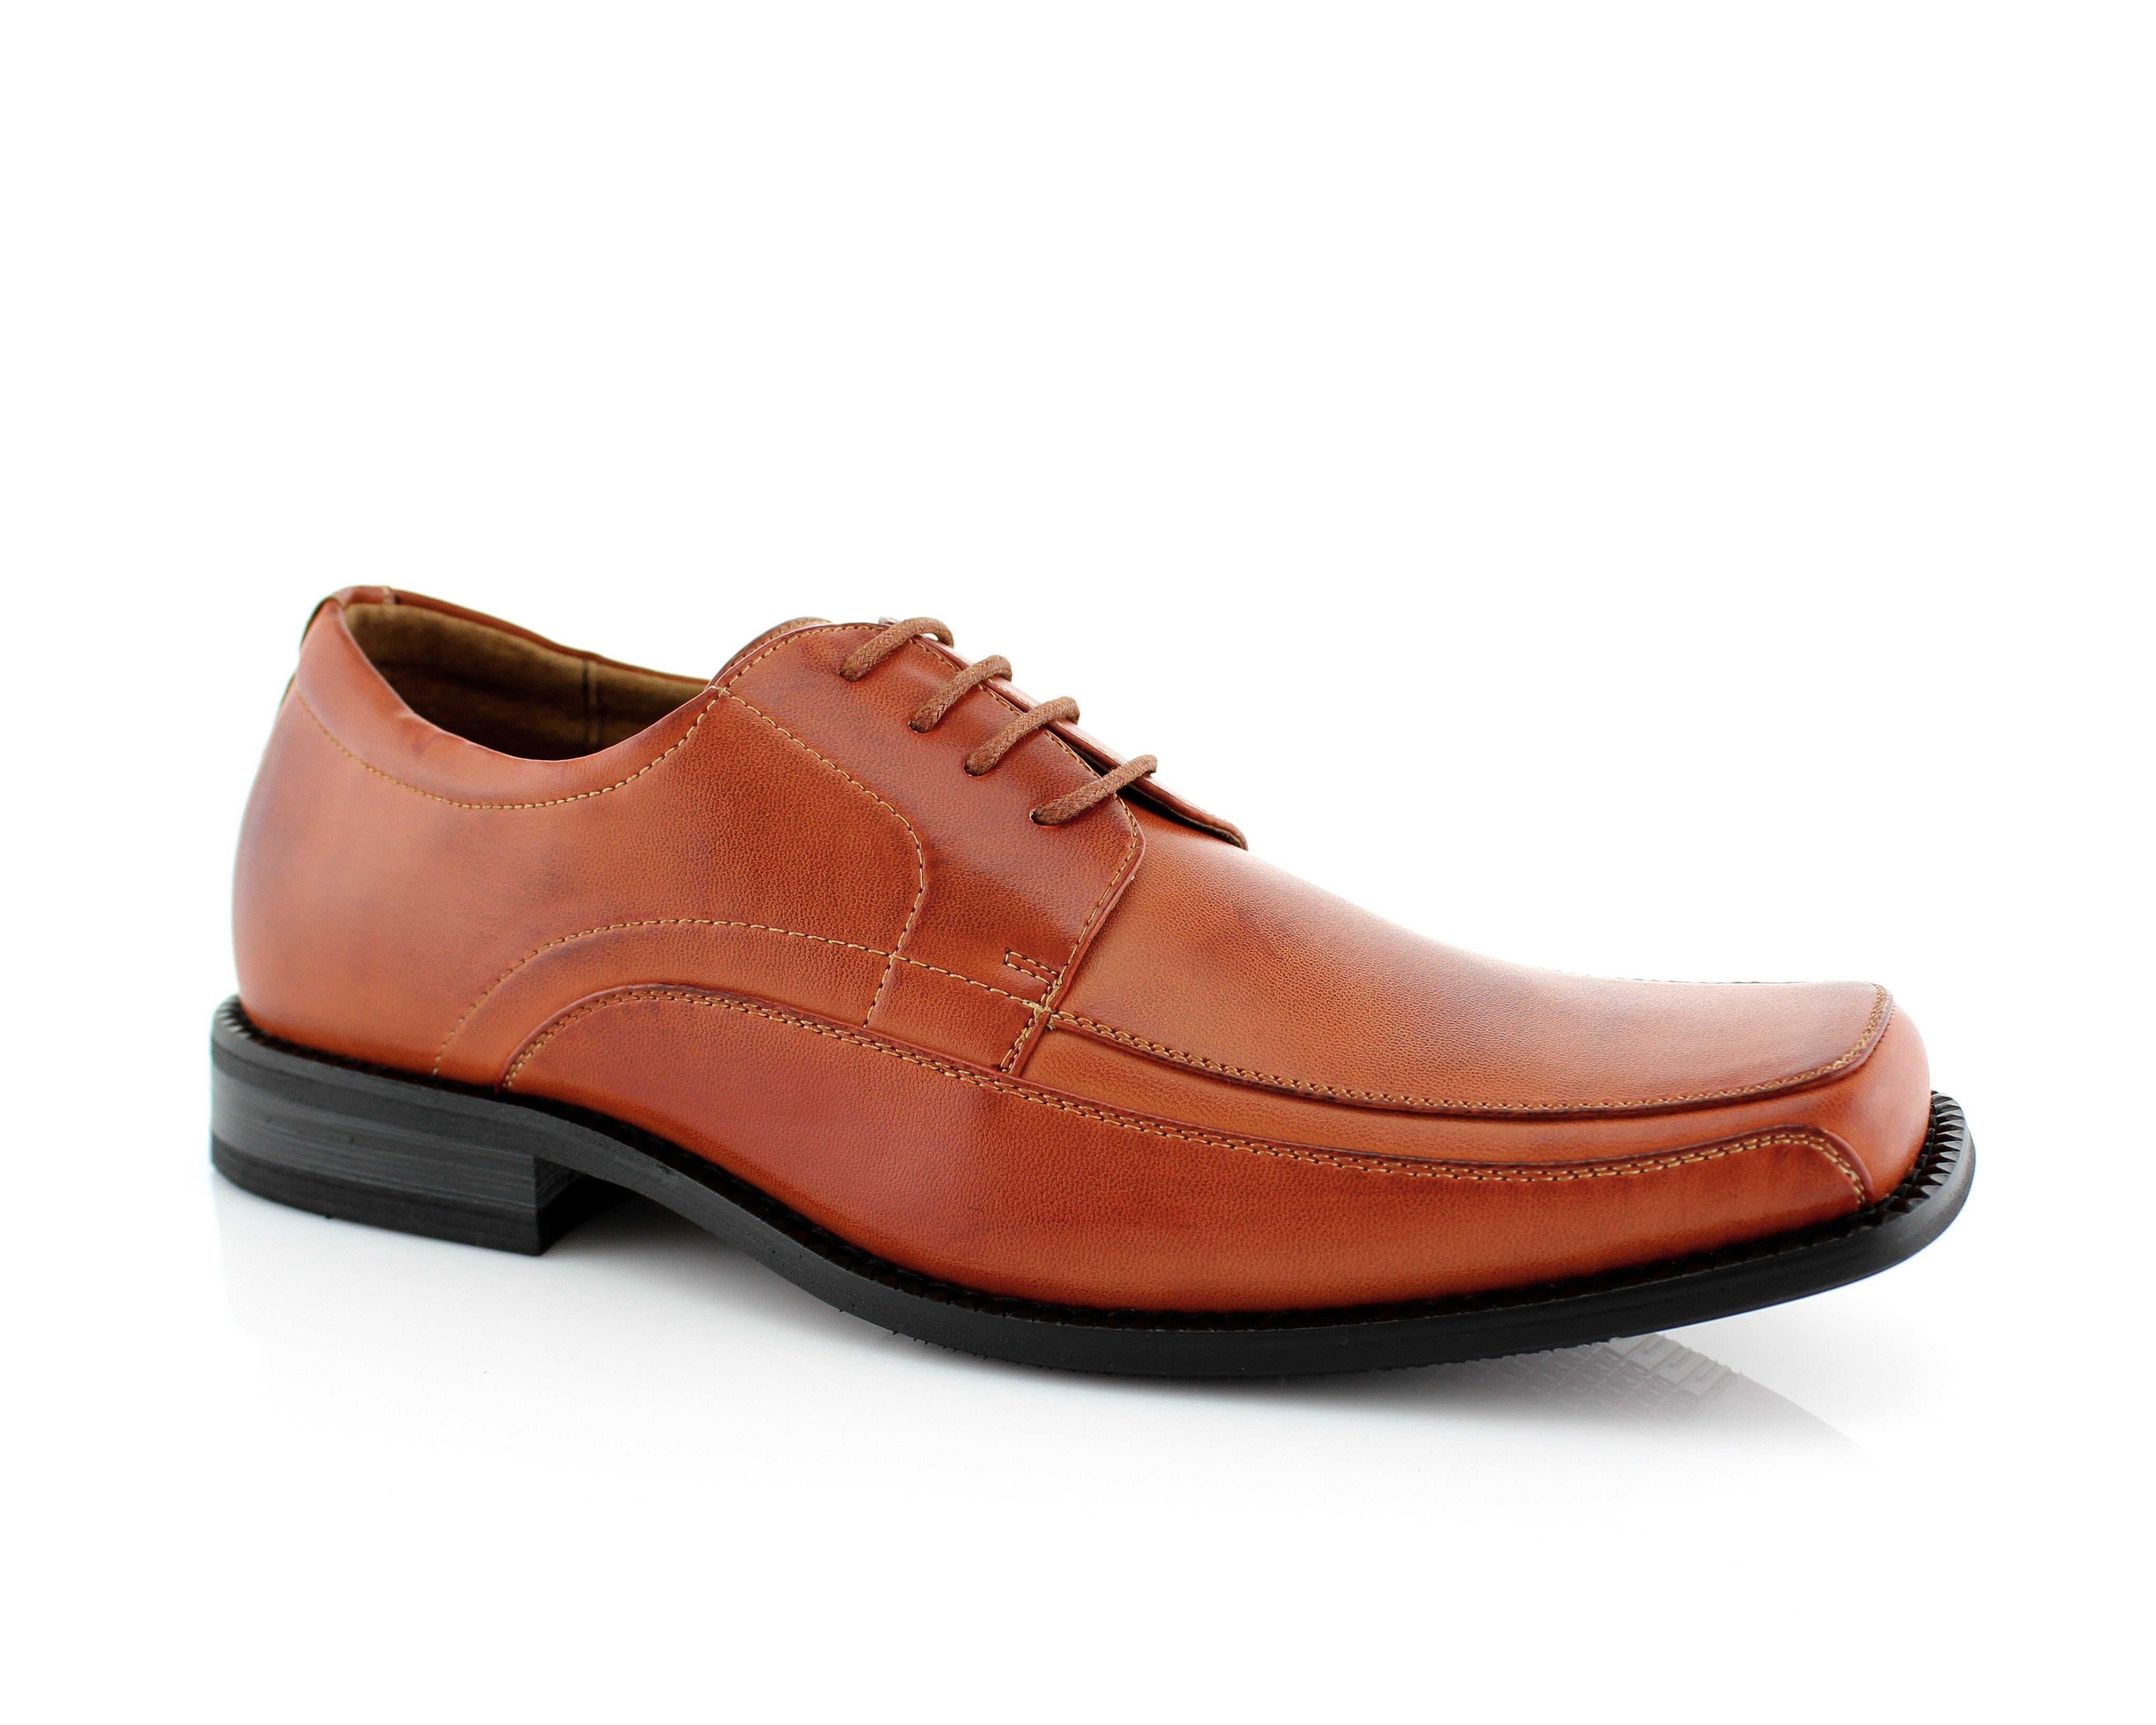 wide business casual shoes